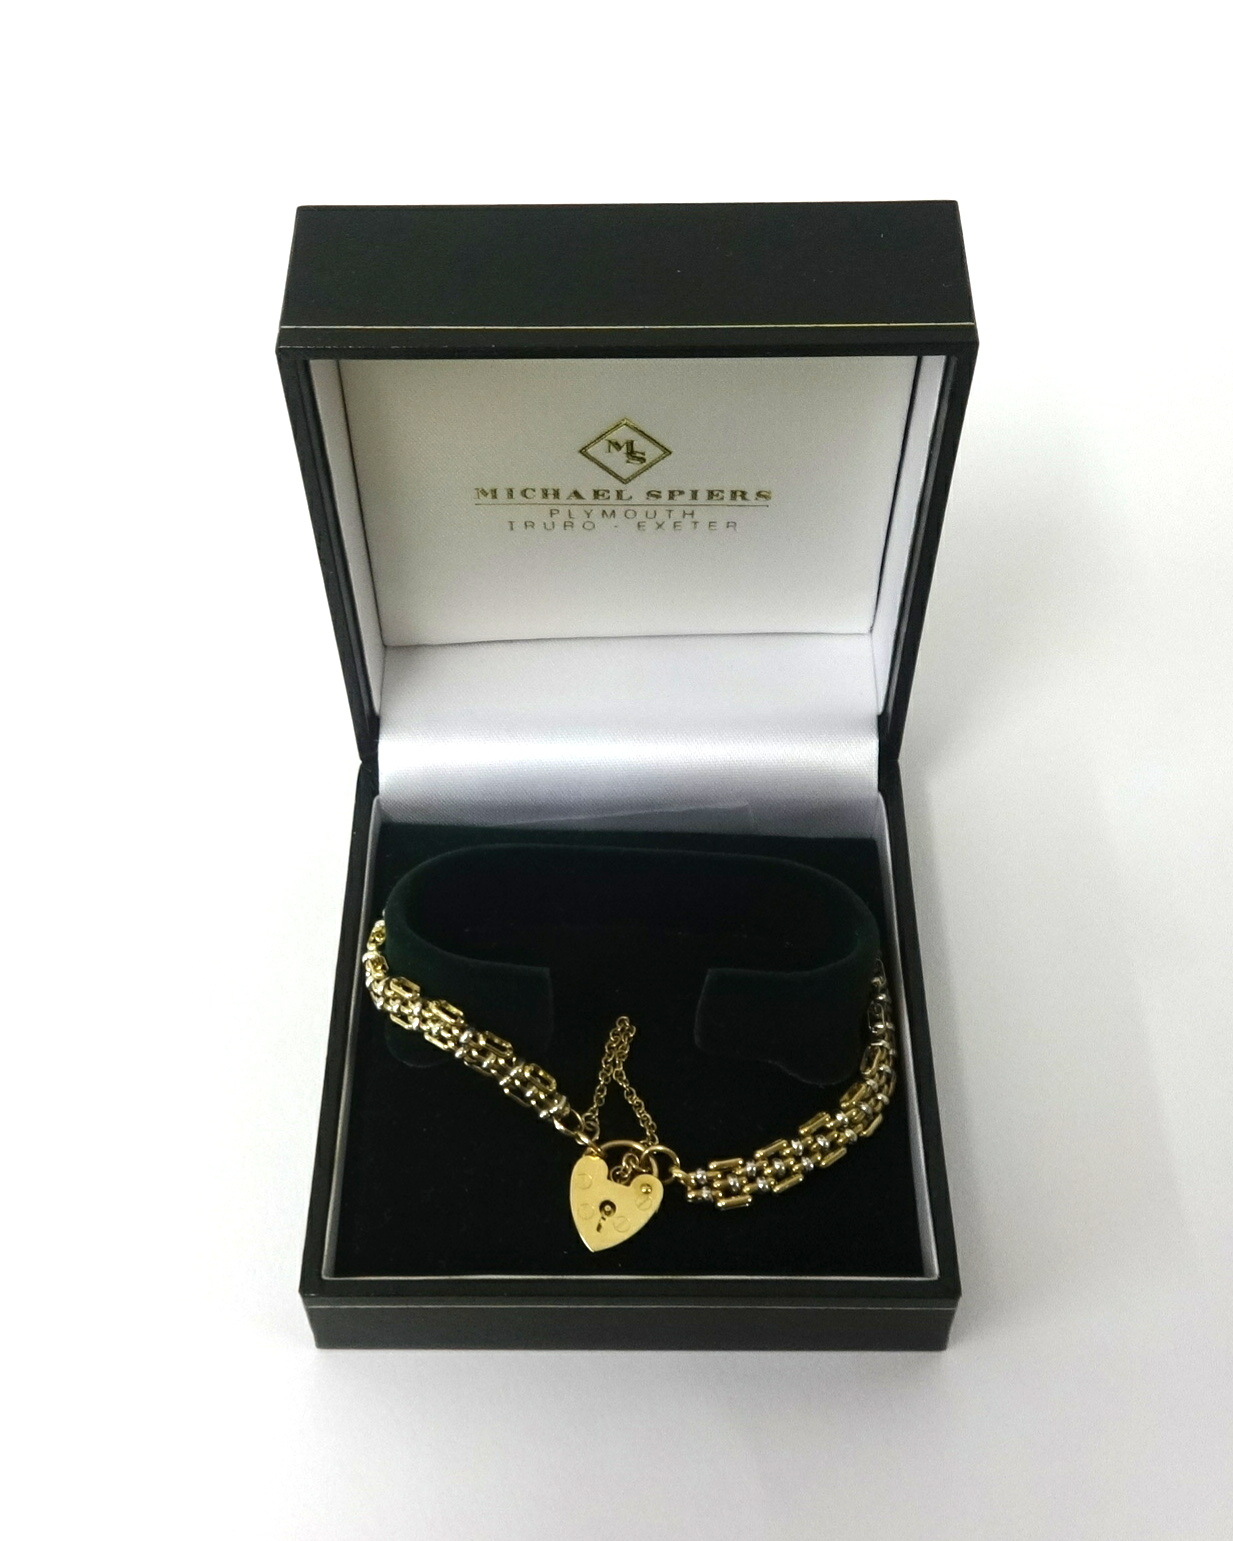 A 9ct gold bracelet with a locket clasp, approx 16gms.